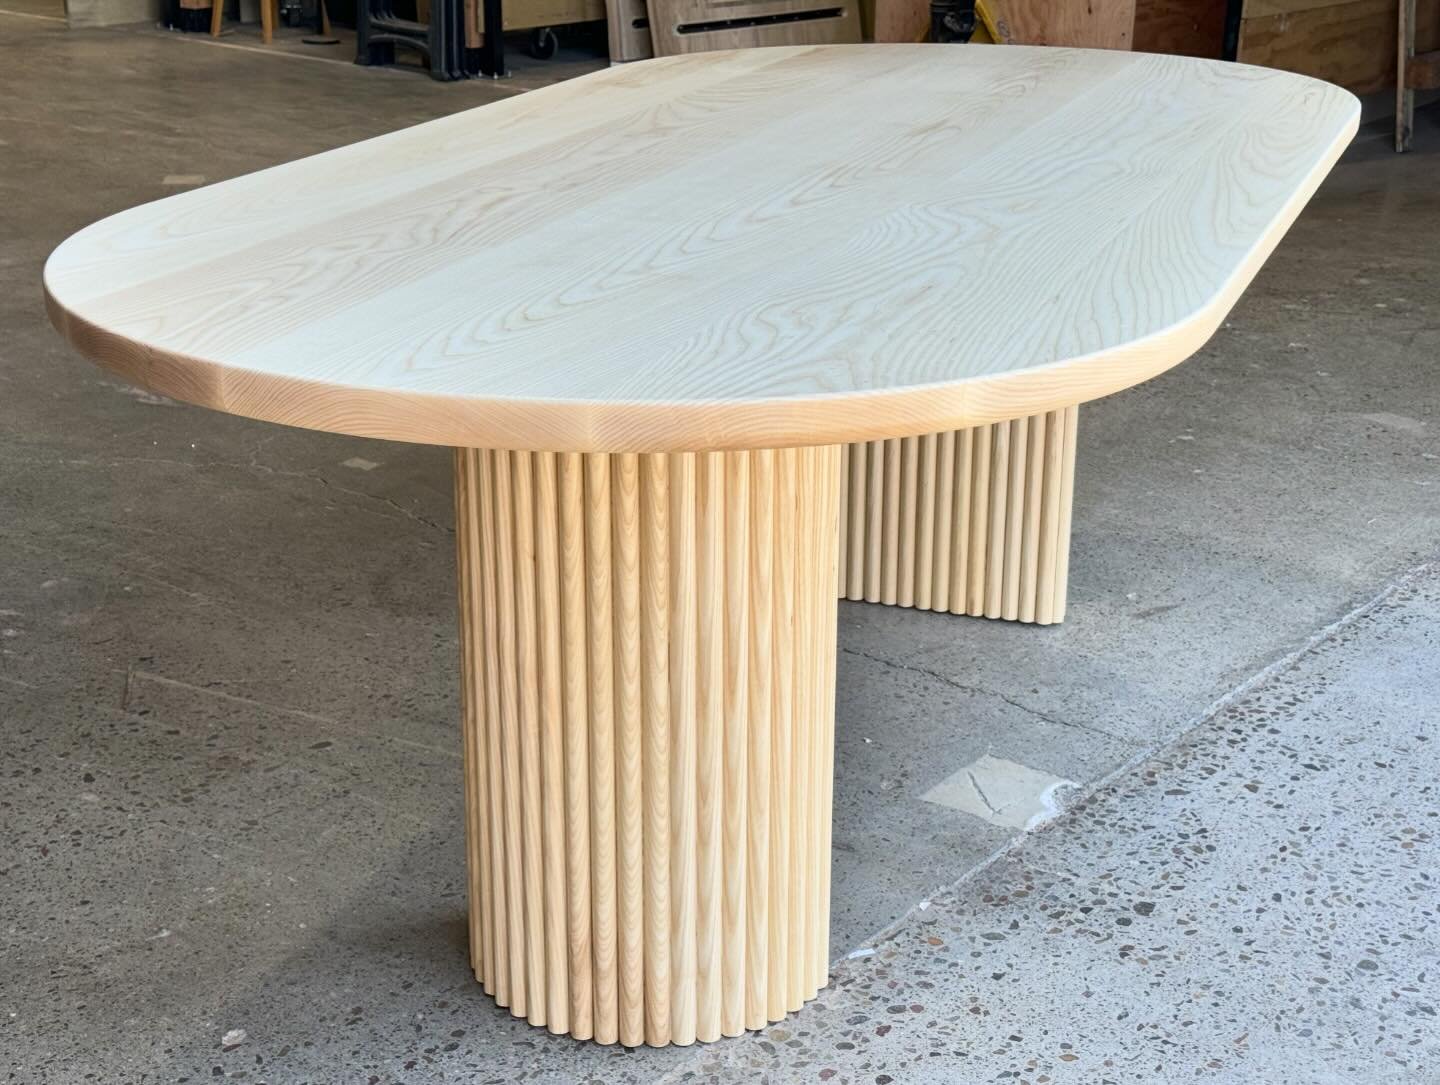 Just packed up this modified version of our &lsquo;Sicily&rsquo; dining table. In solid Ash.
Slight change features half rounded fluted pedestals, paired with our racetrack tabletop.
Dimensions- 86x42&rdquo; x29.5&rdquo;
What do you guys think?
&mdas